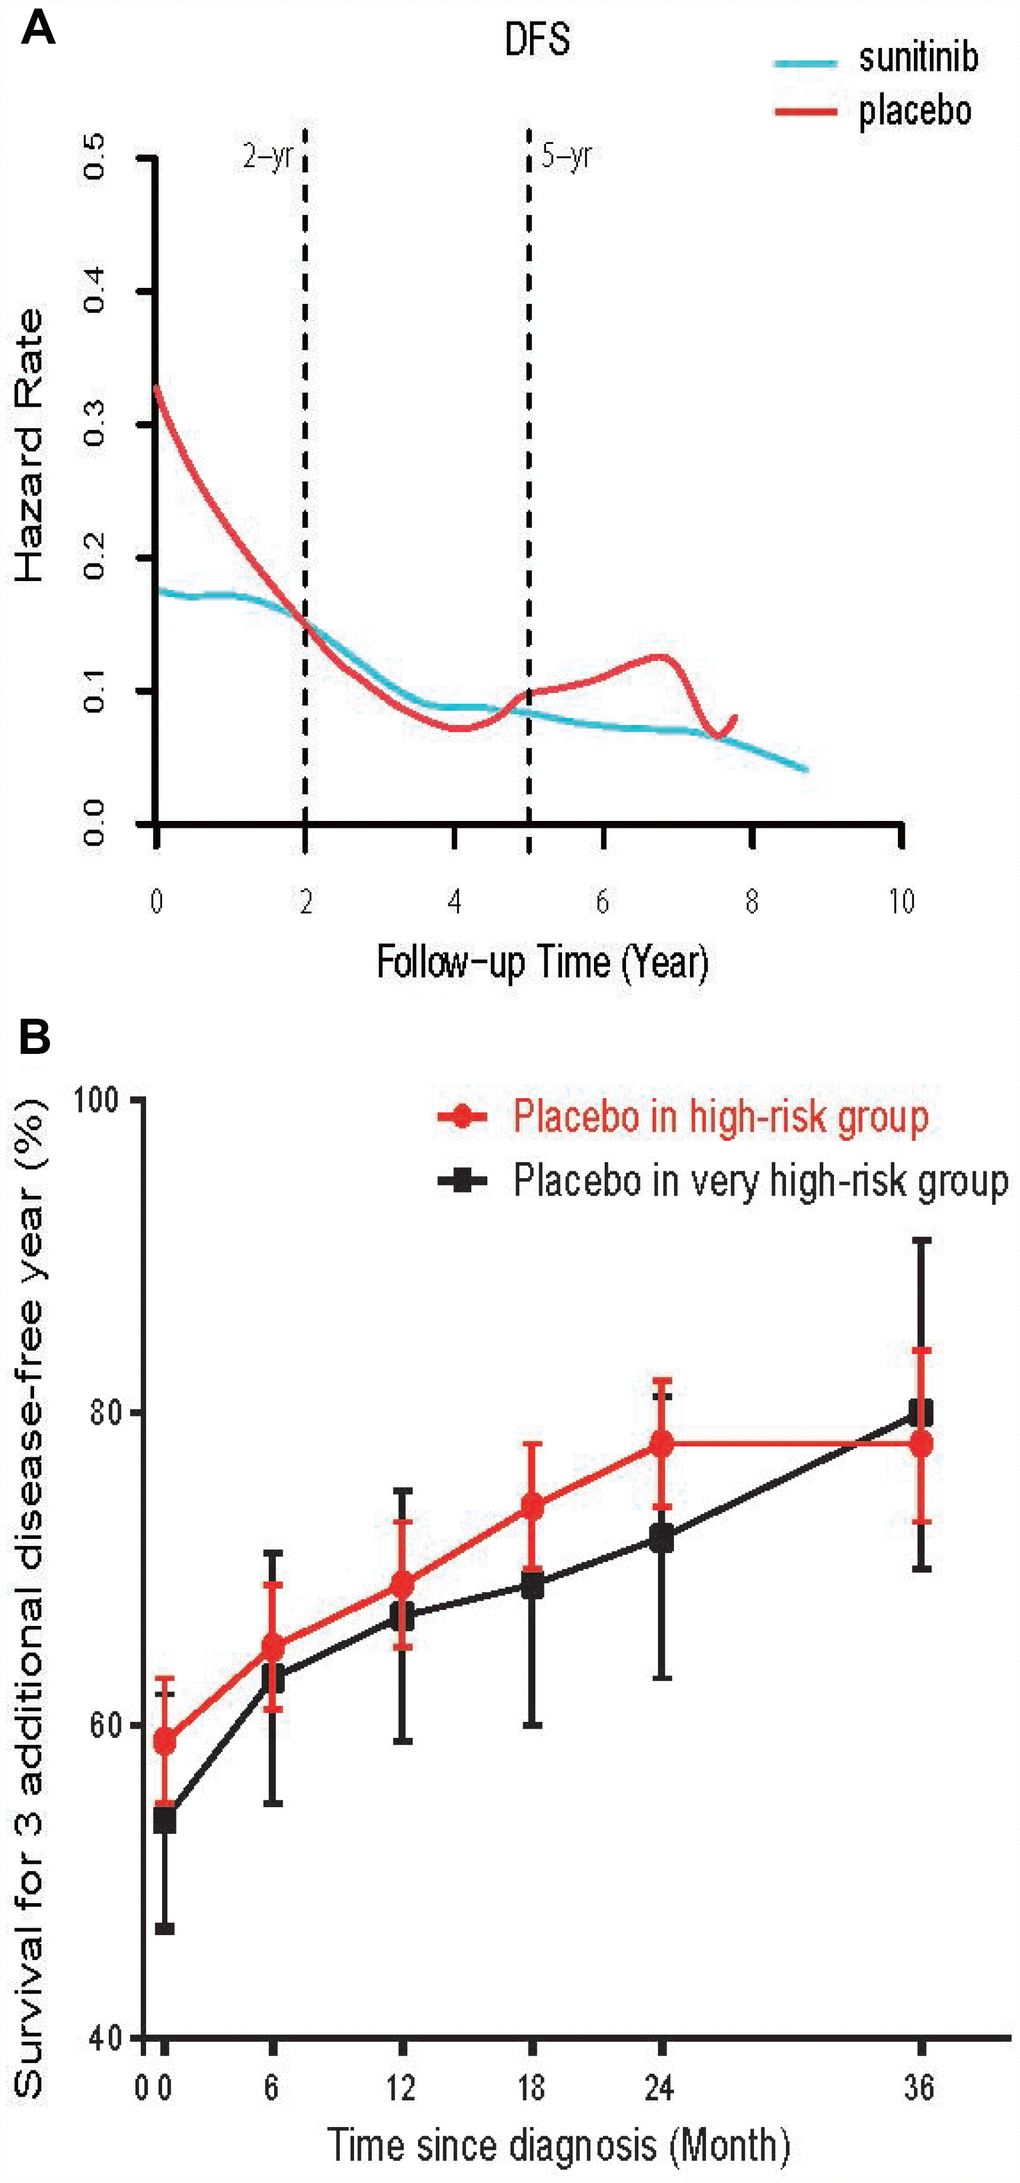 (A) The smooth estimate of HR for relapse among high-risk ccRCC patients treated with adjuvant sunitinib or placebo. (B) Conditional probability of surviving an additional 3 disease-free year at various time points in very high-risk (T3, Fuhrman grade 2, ECOG Performance Status≥1; or T4 or N1) and high-risk group. The dots represent the probability point estimates, and the vertical bars represent the 95% CIs of the corresponding point estimates.